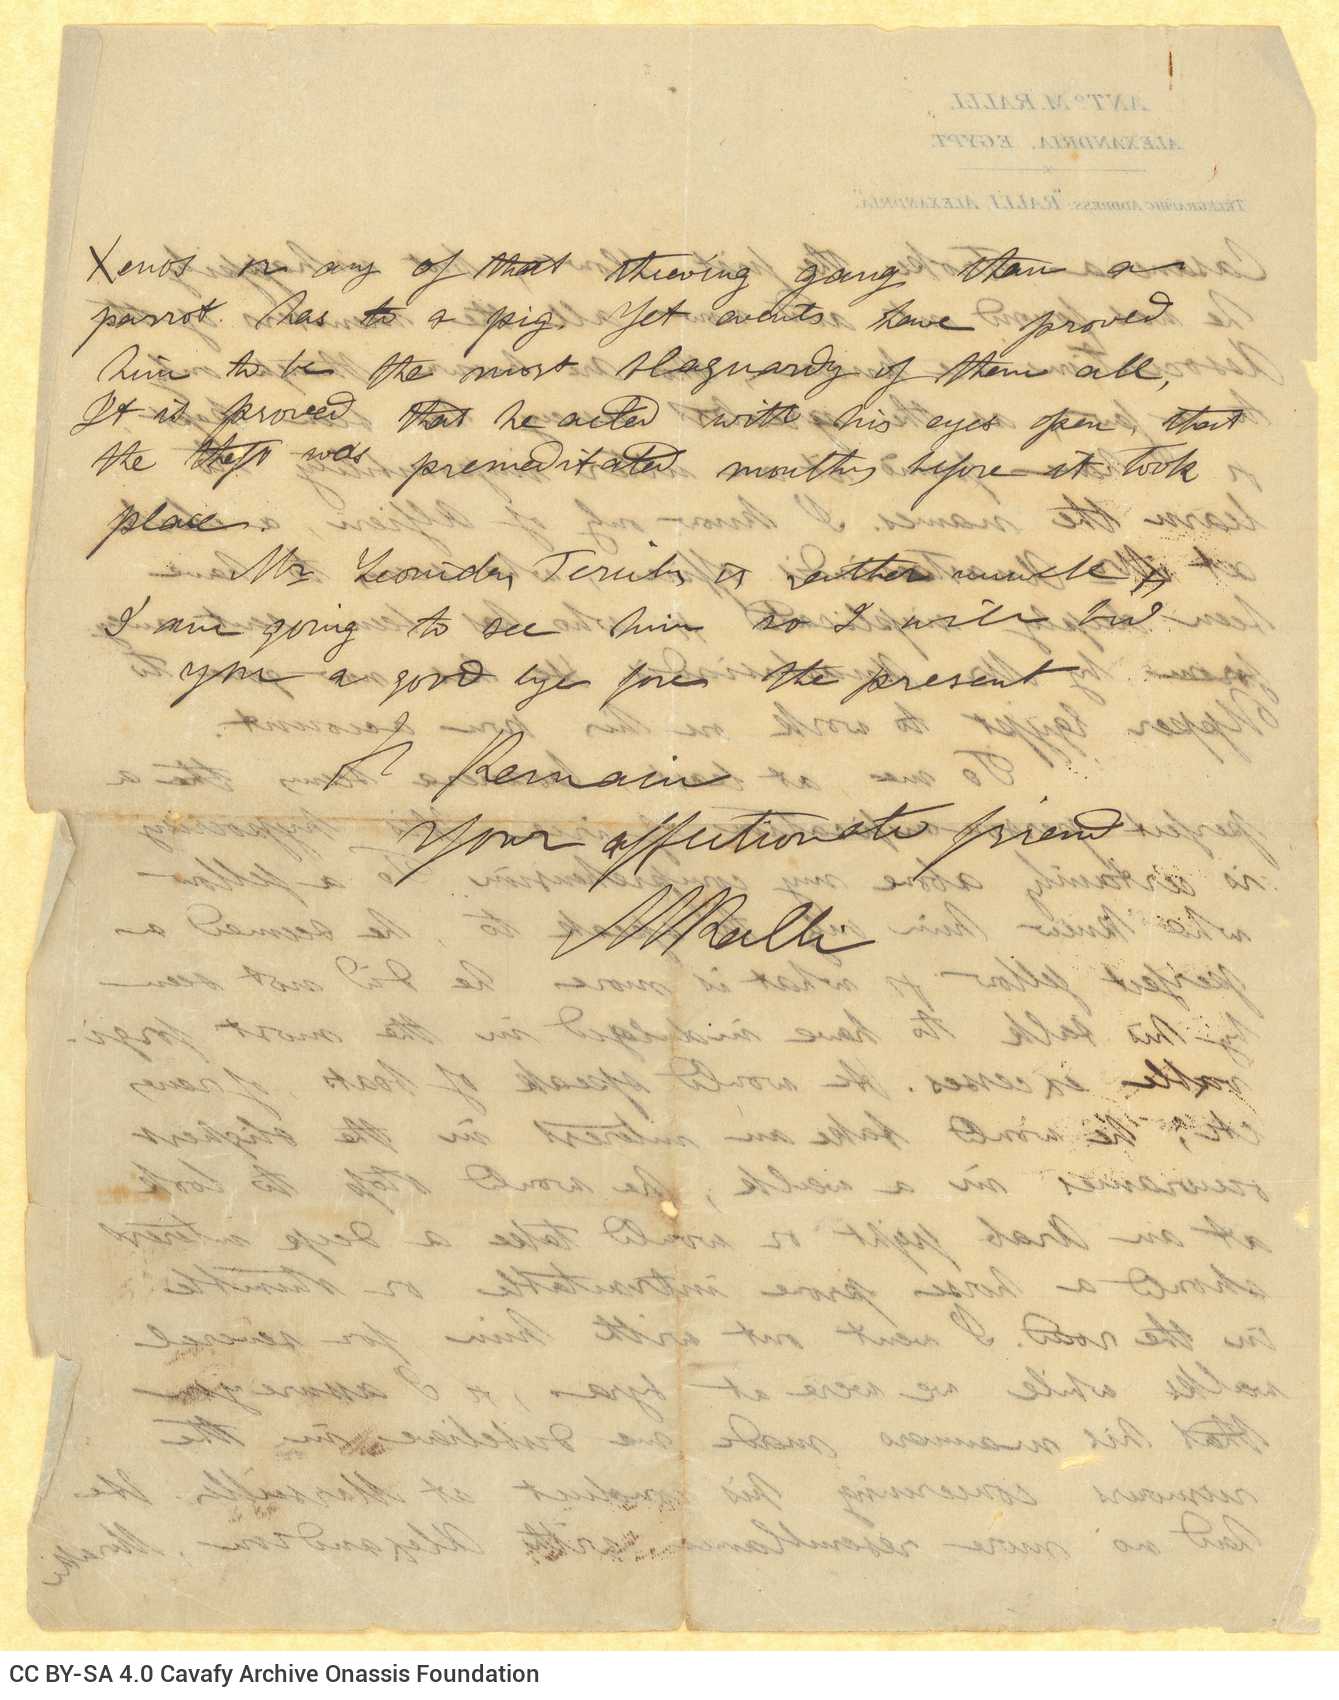 Handwritten letter by Mike Ralli to Cavafy on two sheets, with notes on all sides. It is a reply to a letter he had received.